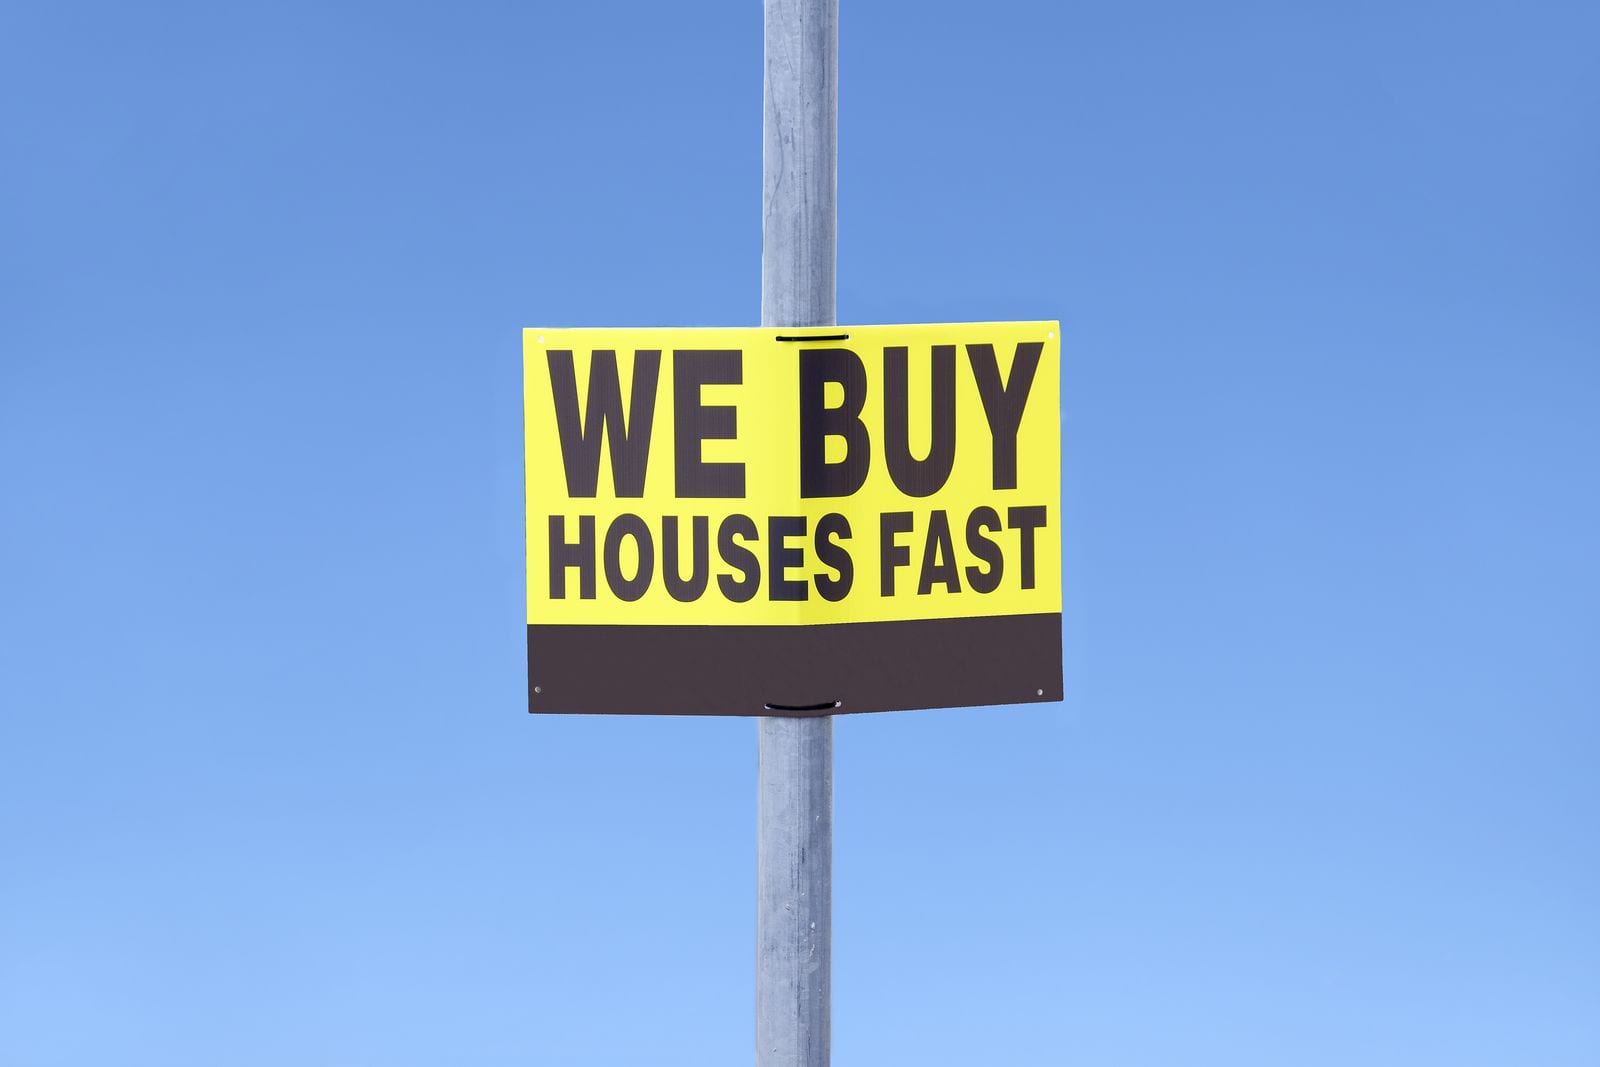 We Buy Houses” signs under scrutiny by York resident - fox43.com